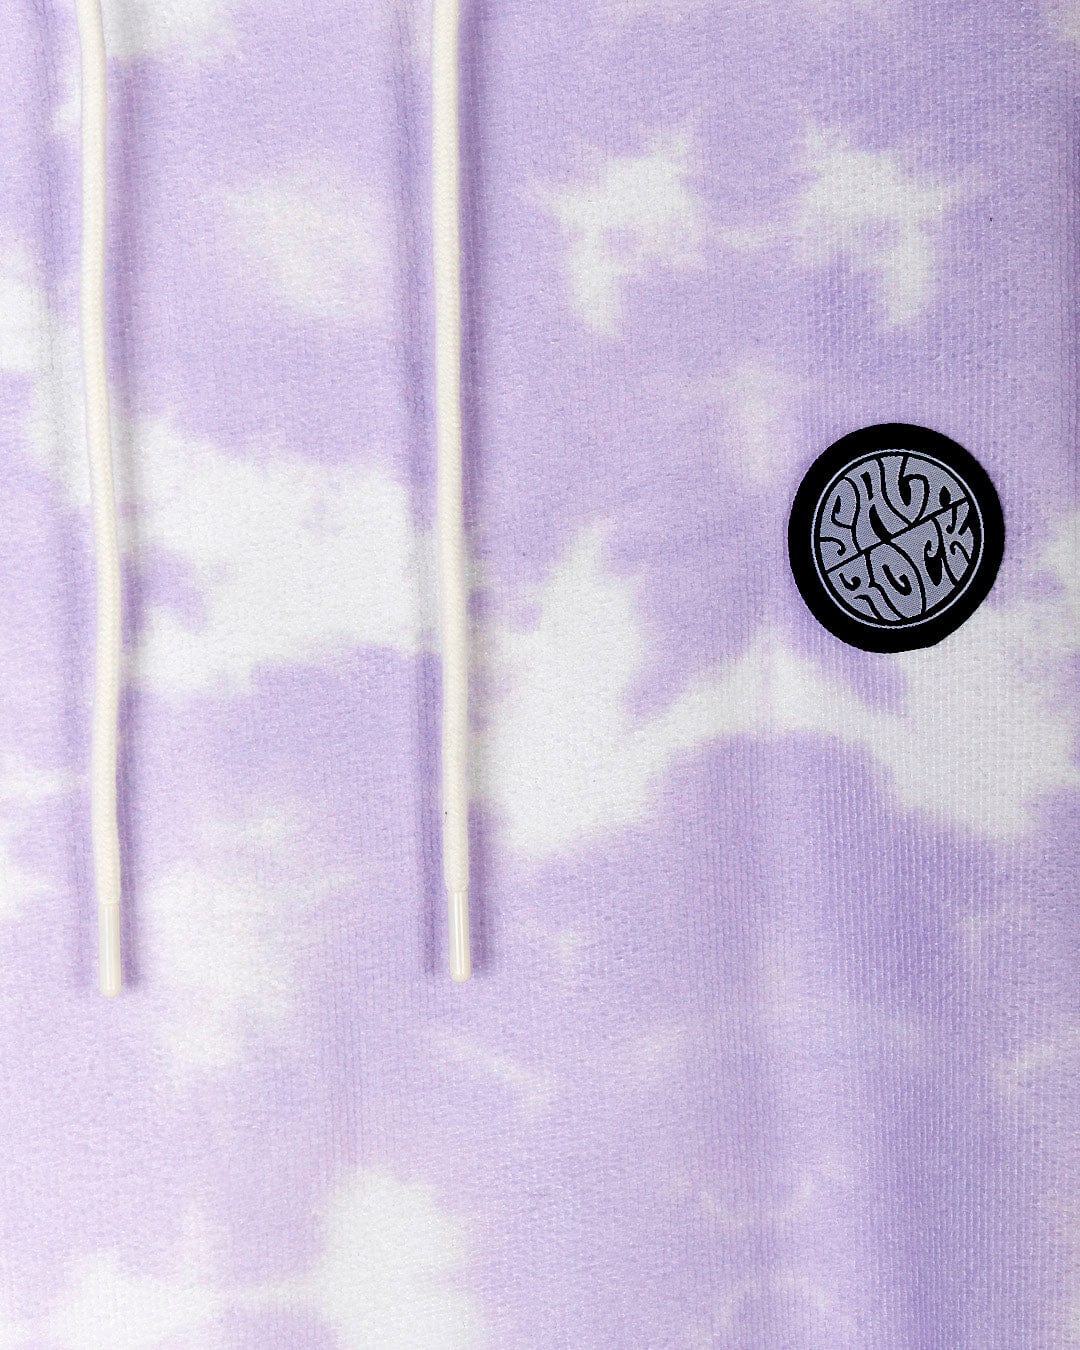 Purple Saltrock Ubud - Womens Tie Dye Changing Towel - Light Purple with a circular black and white graphic patch and white drawstrings.